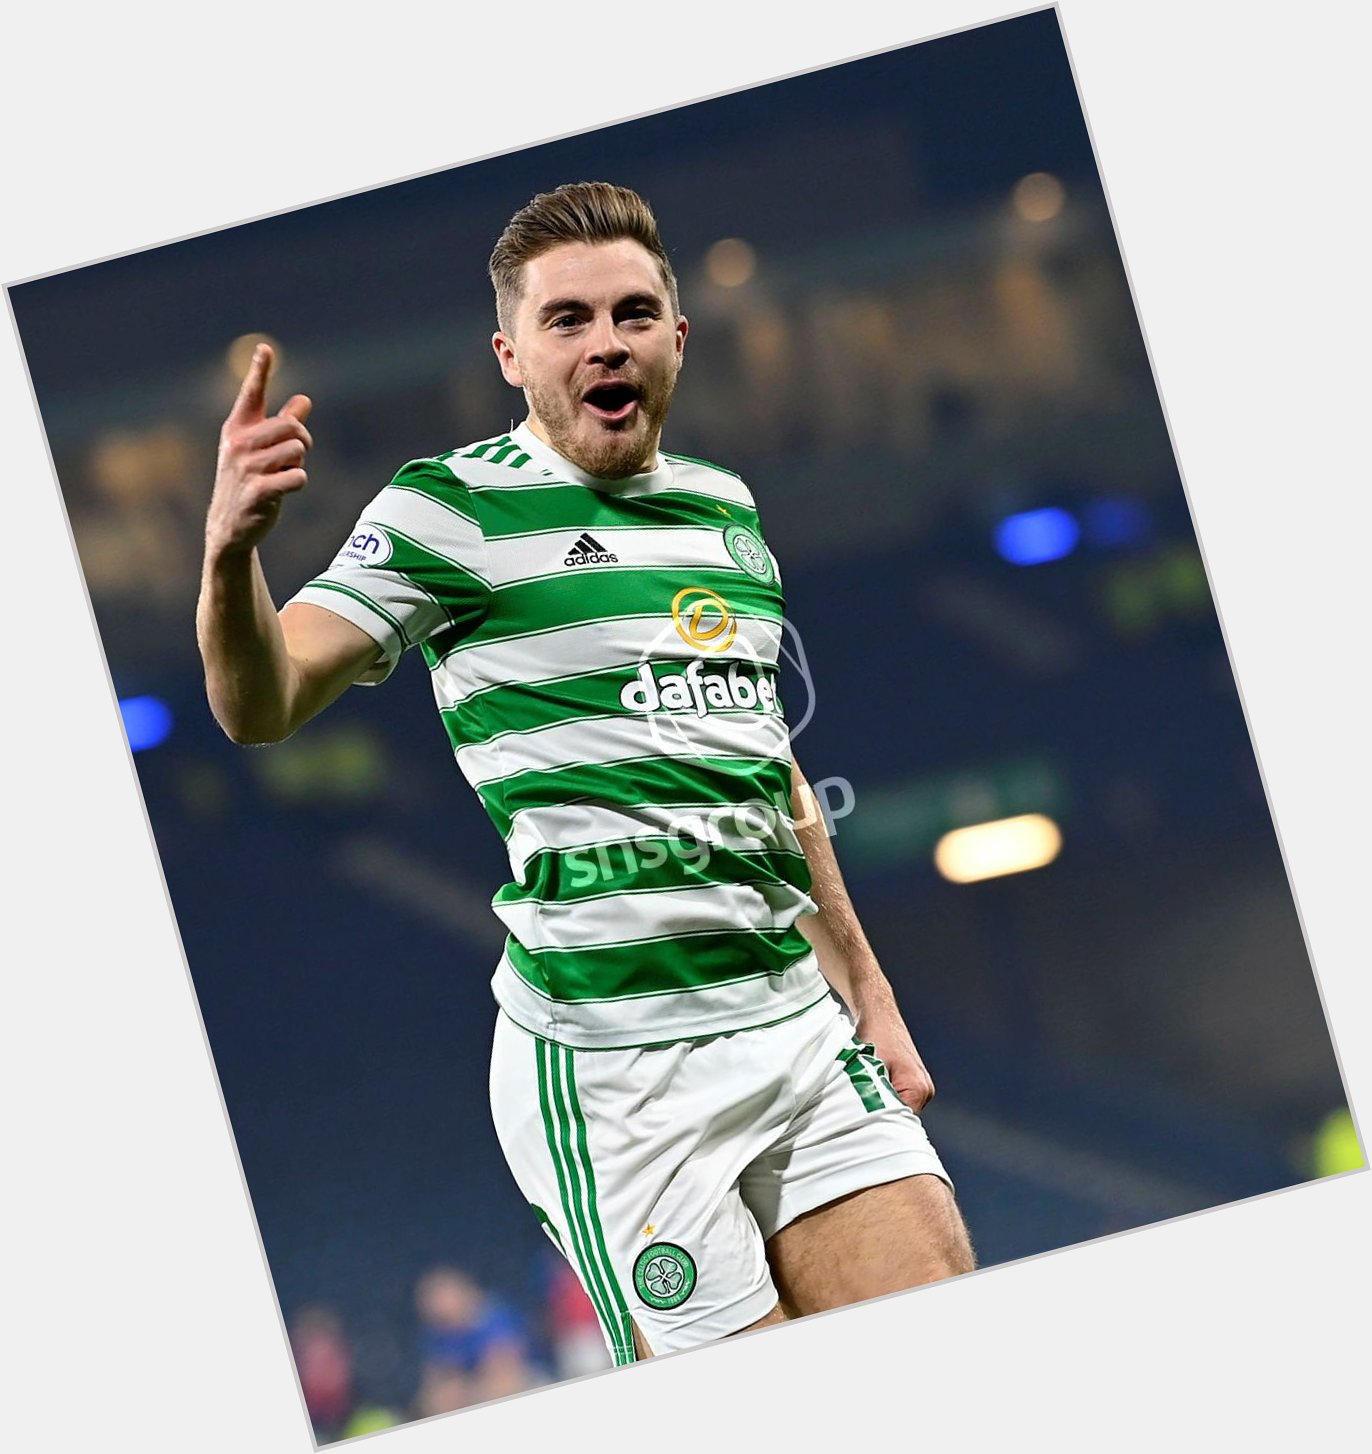         Happy Birthday to Celtic and Scotland midfielder James Forrest who turns 31 today! 